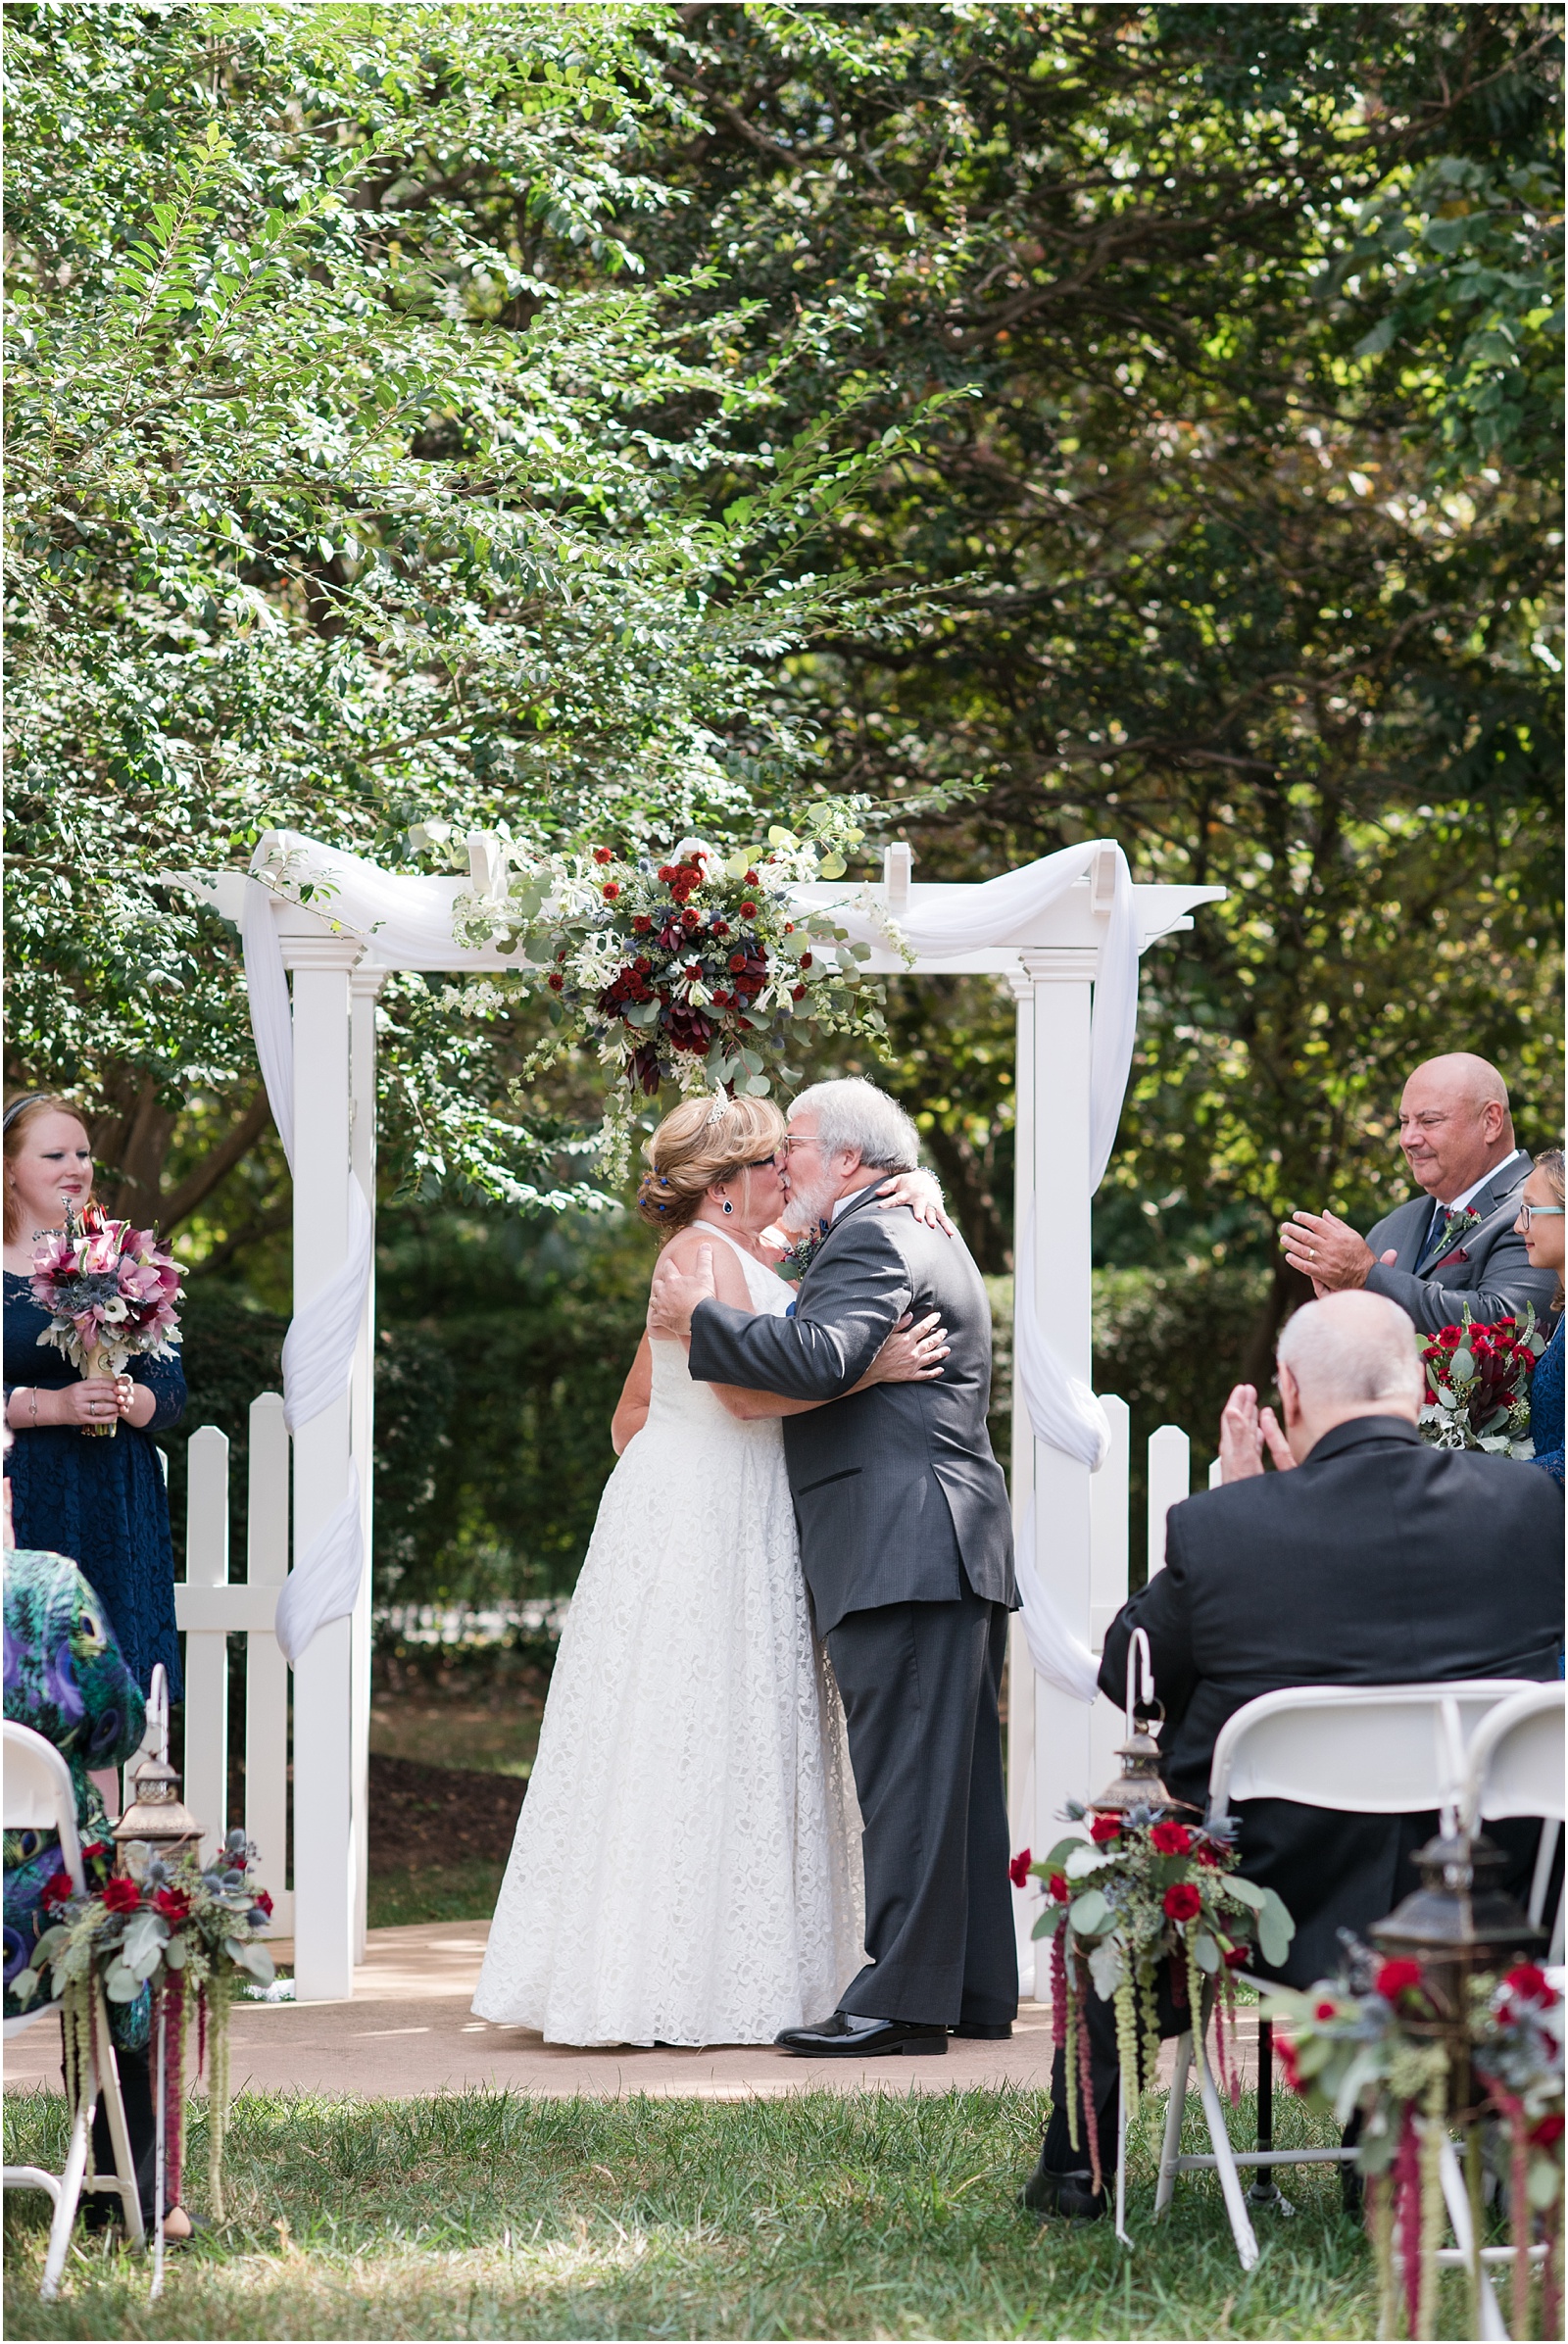 Michelle and Sara Photography, Michelle and Sara weddings, michelle robinson photography, burke manor inn, fall wedding, wedding ceremony